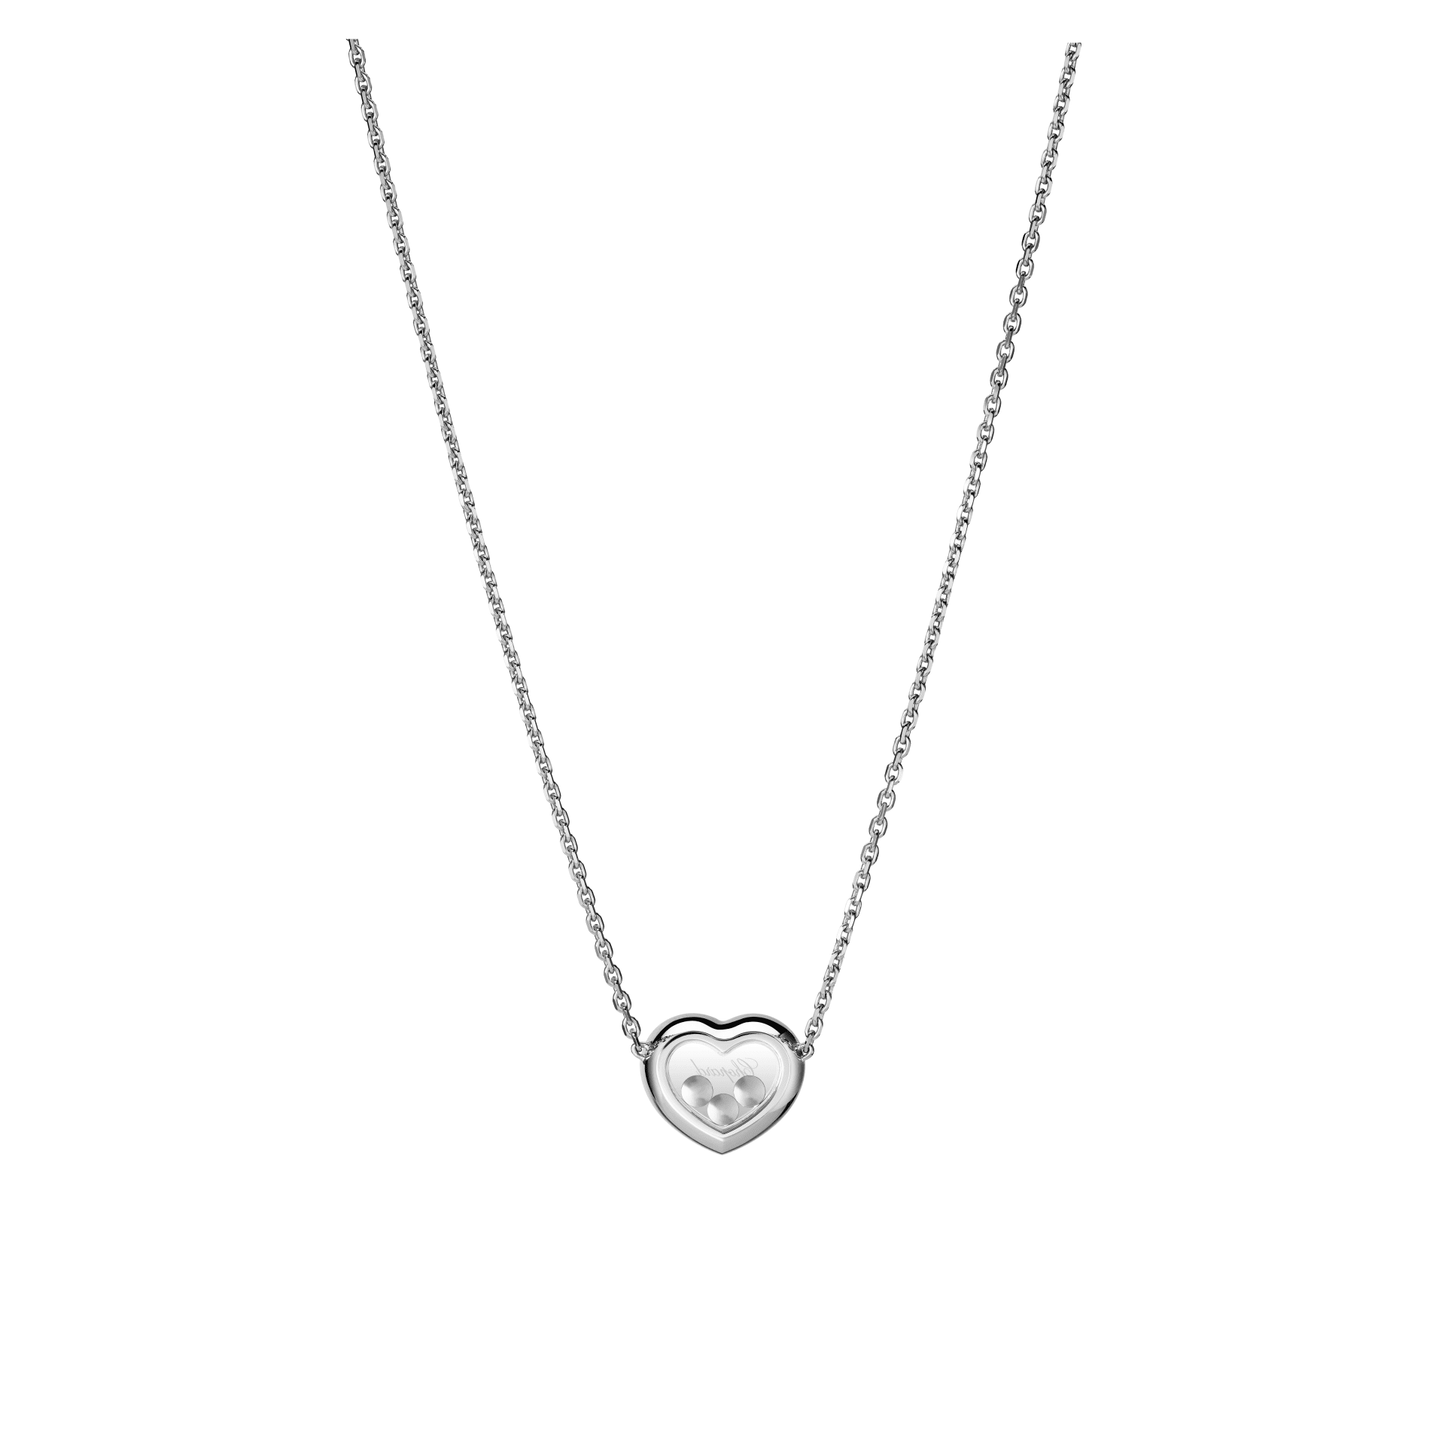 HAPPY DIAMONDS ICONS NECKLACE, ETHICAL WHITE GOLD, DIAMONDS 81A611-1001